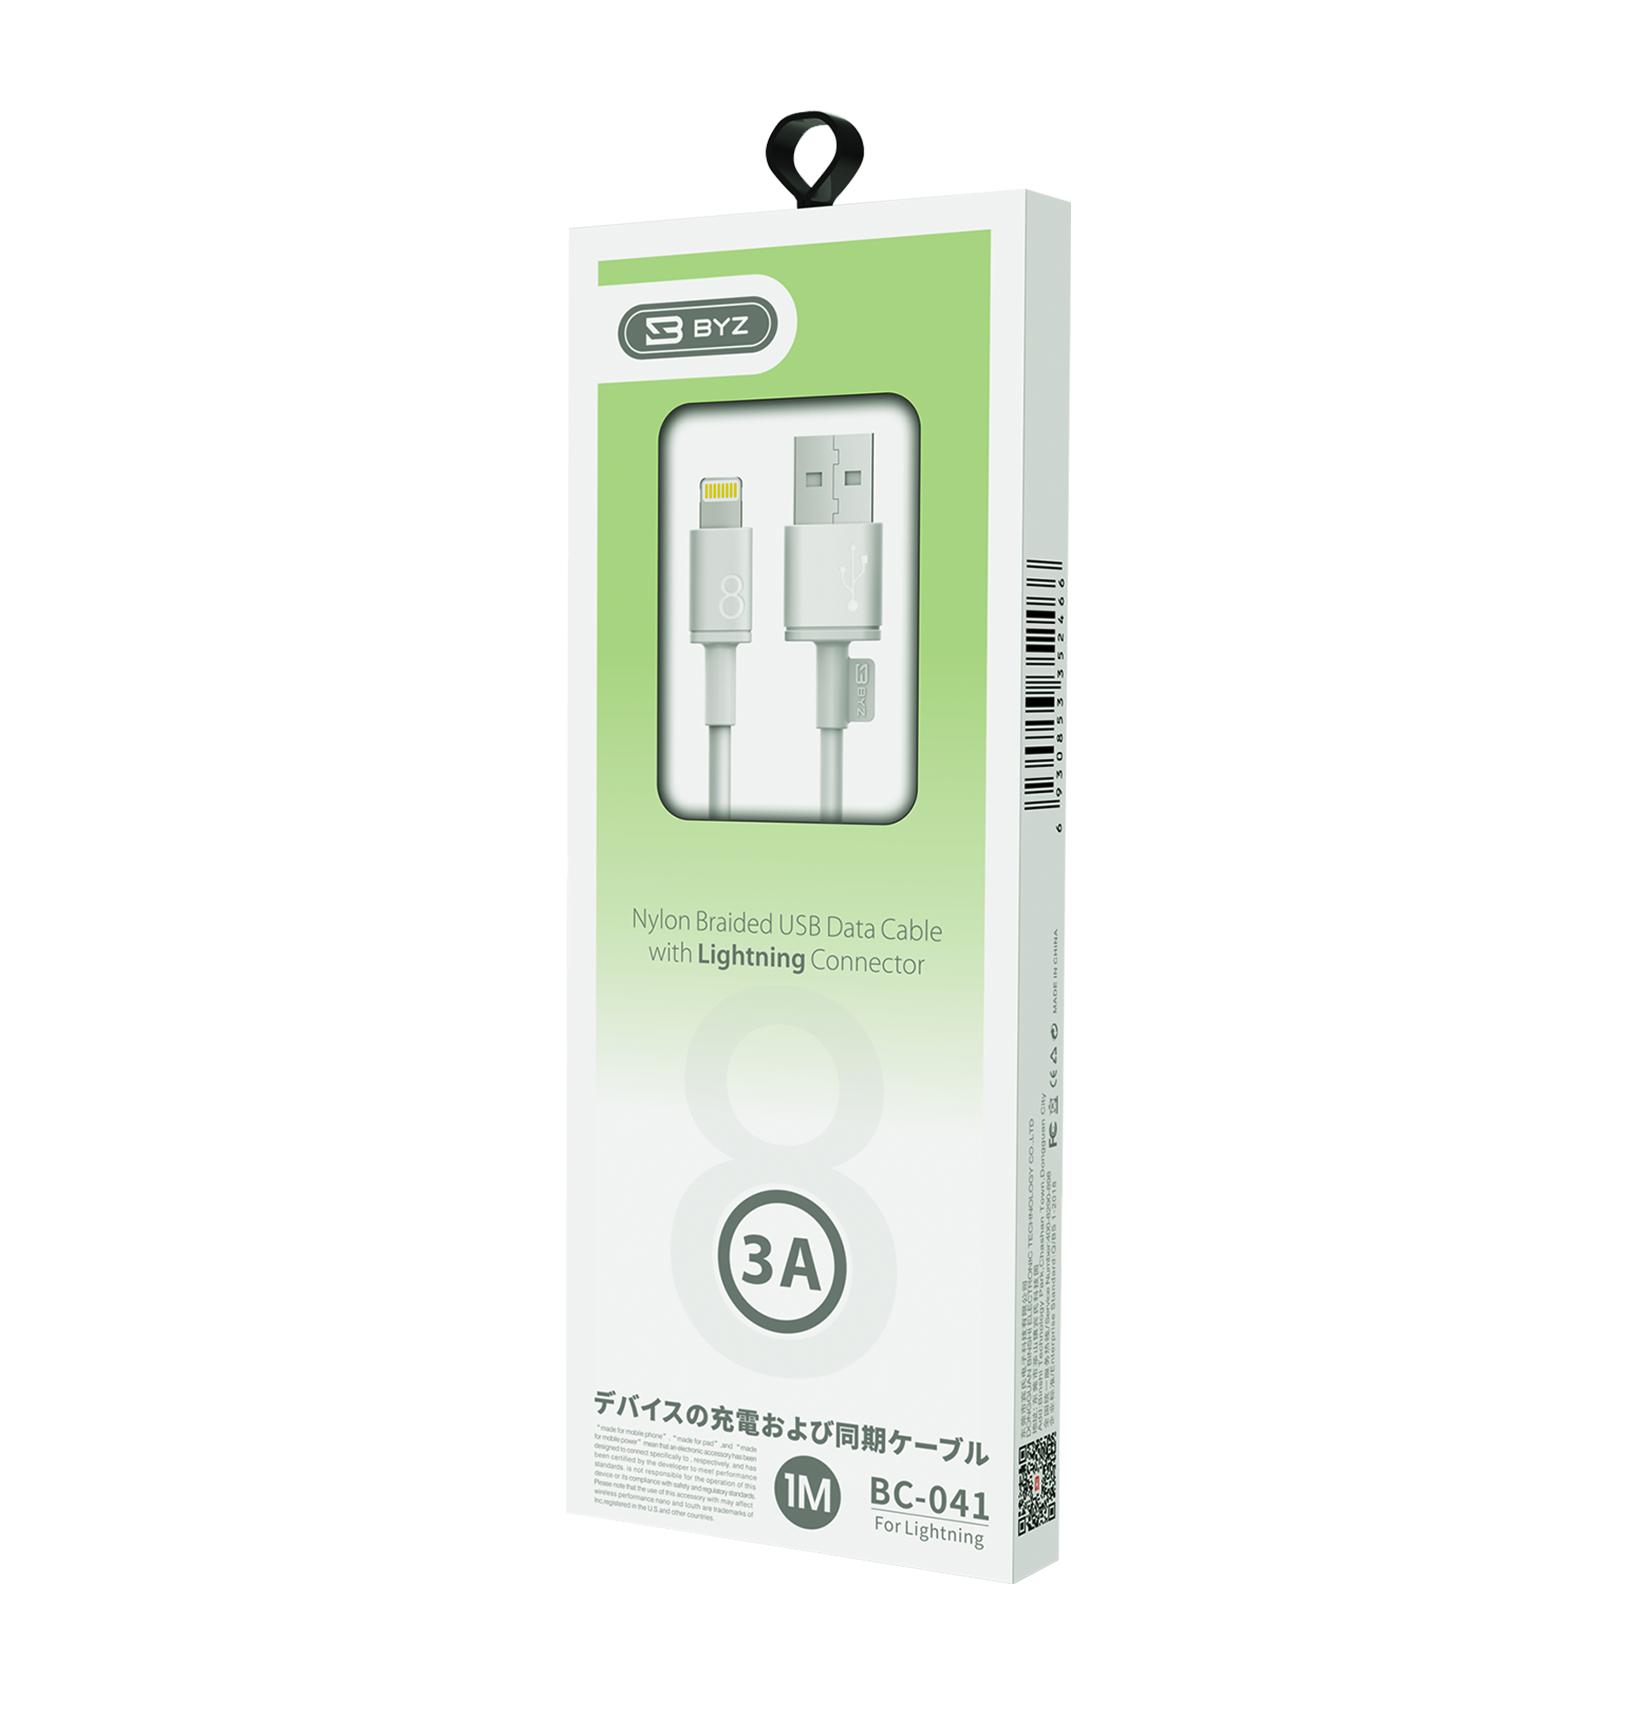 BYZ BC-041i Cable Charger